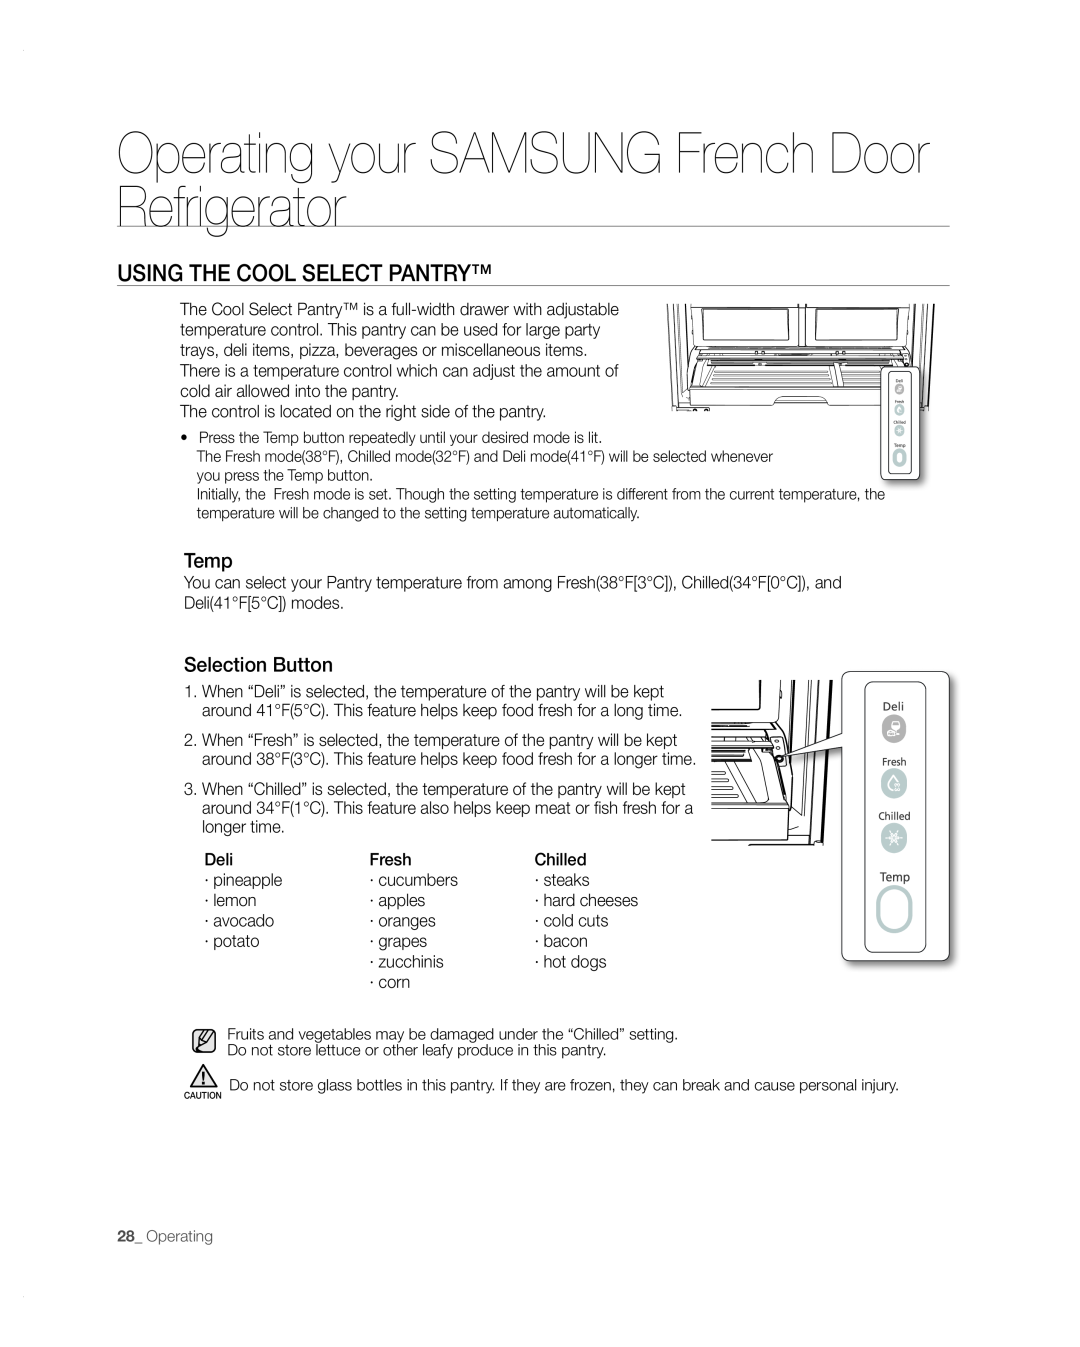 Samsung RFG297AARS/XAA user manual Using The Cool Select Pantry, Operating your SAMSUNG French Door Refrigerator, Temp 